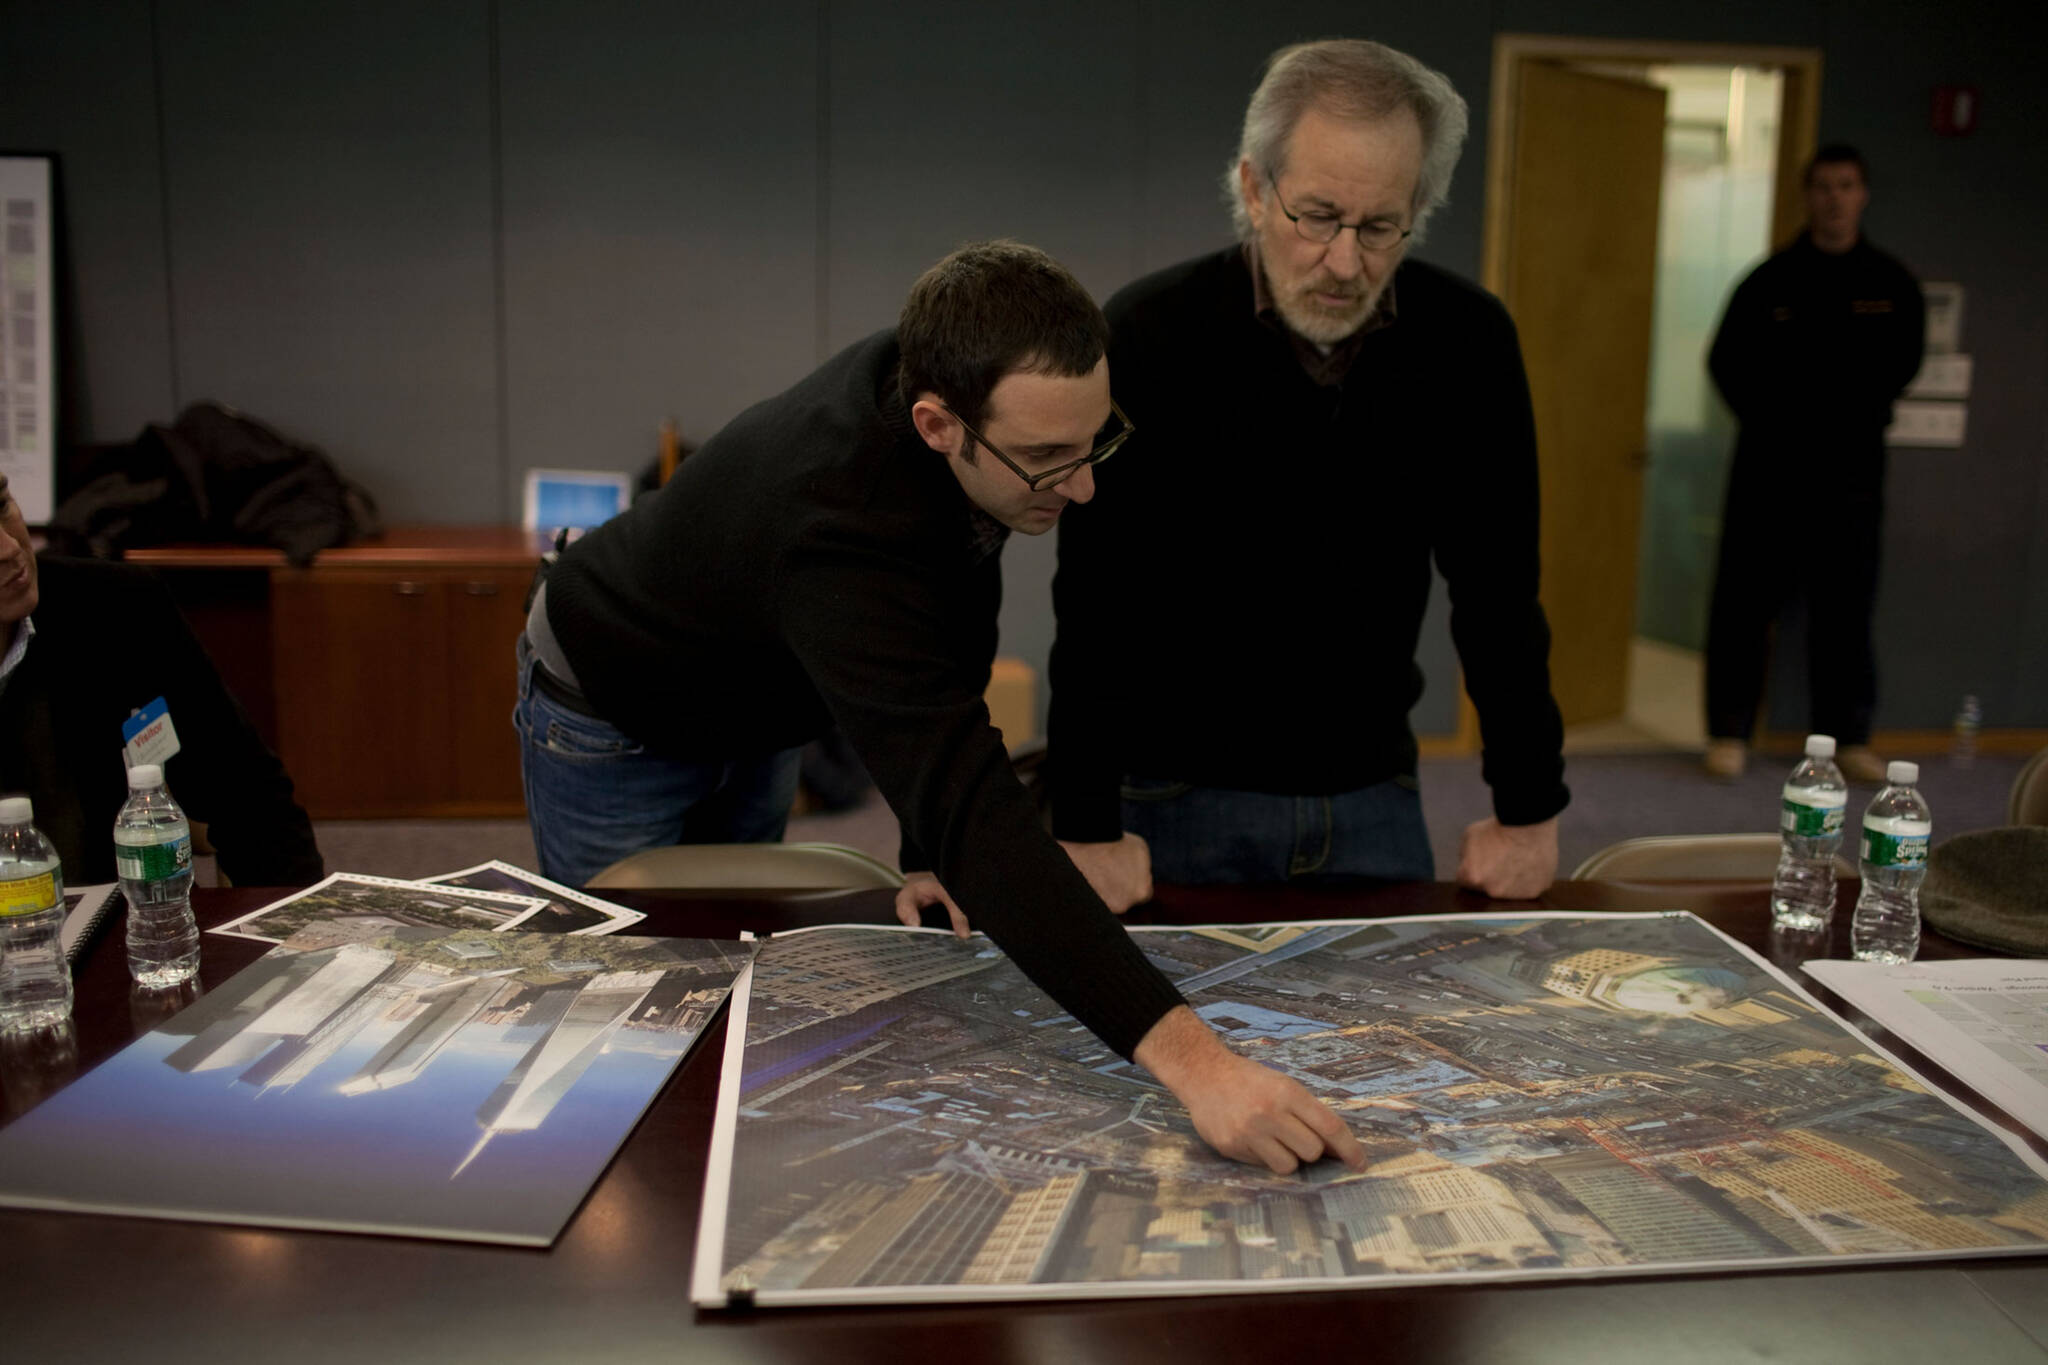 Danny Forster and Steven Spielberg reviewing takes for the Rising: Rebuilding Ground Zero documentary Co-produced by Danny Forster and Steven Spielberg about the rebuilding of the World Trade Center site in the wake of 9/11.